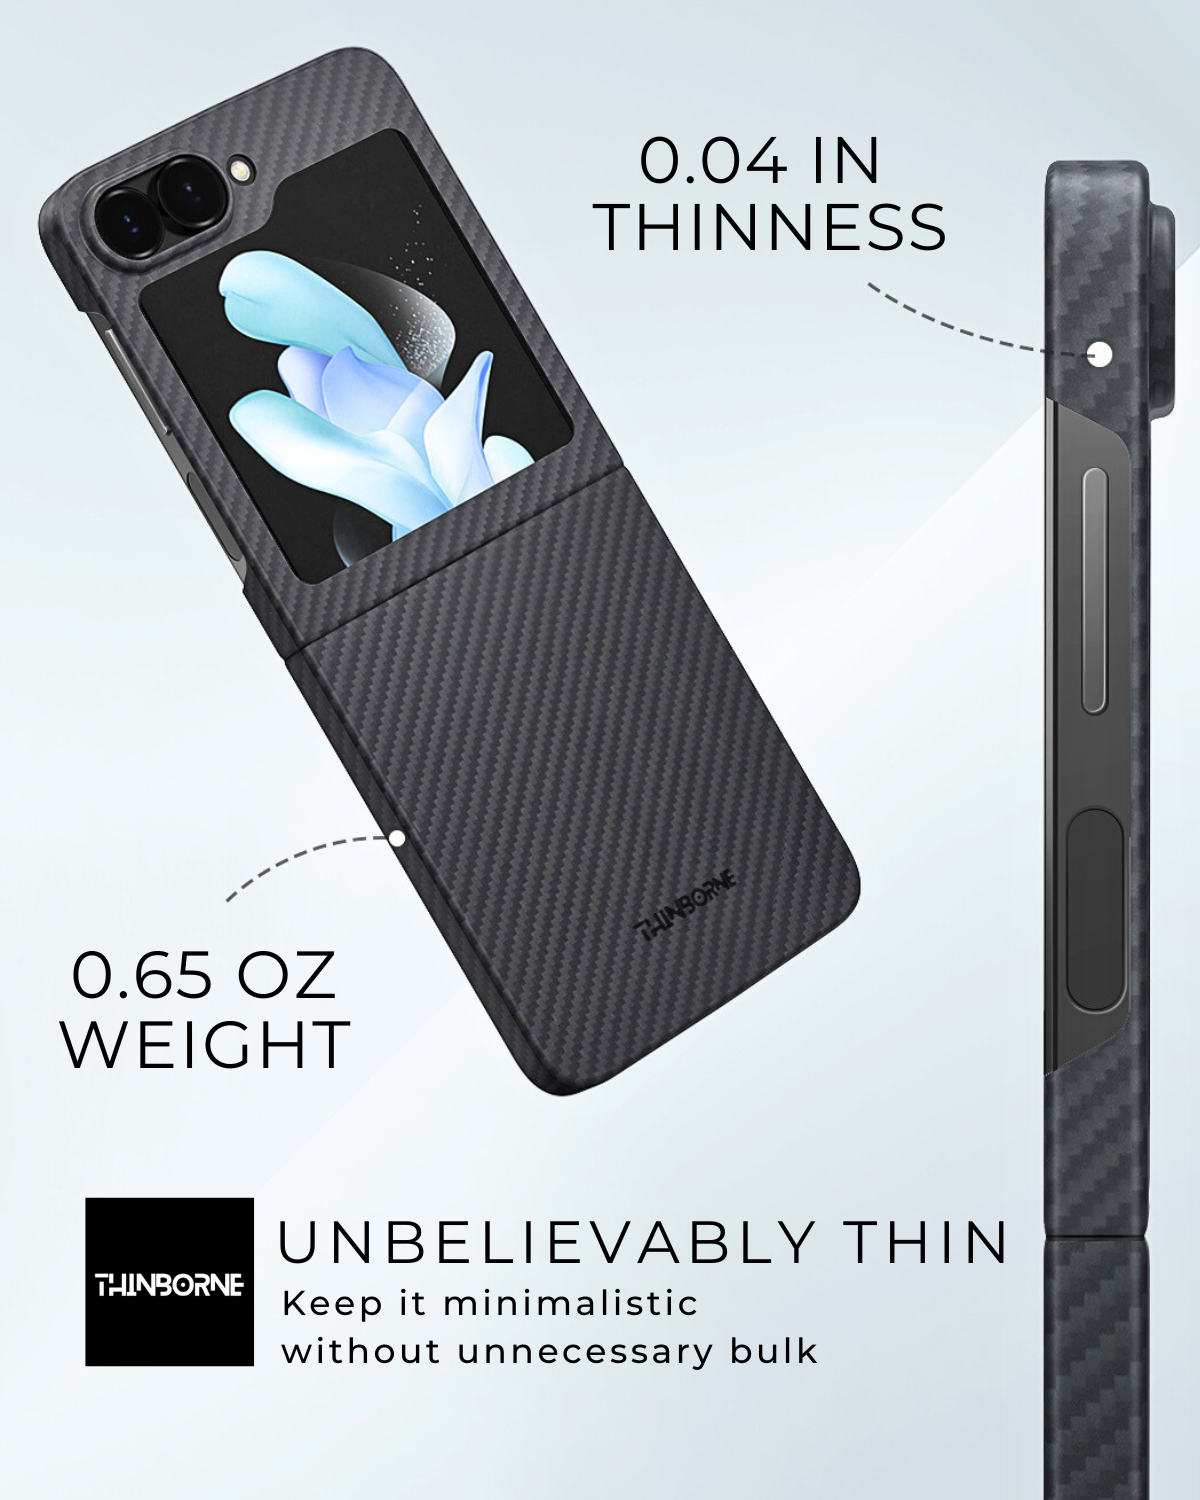 showing the galaxy z flip 6 slim case is only 0.04 inch thin and 0.65 OZ weight. it is a minimalist and lightweight case